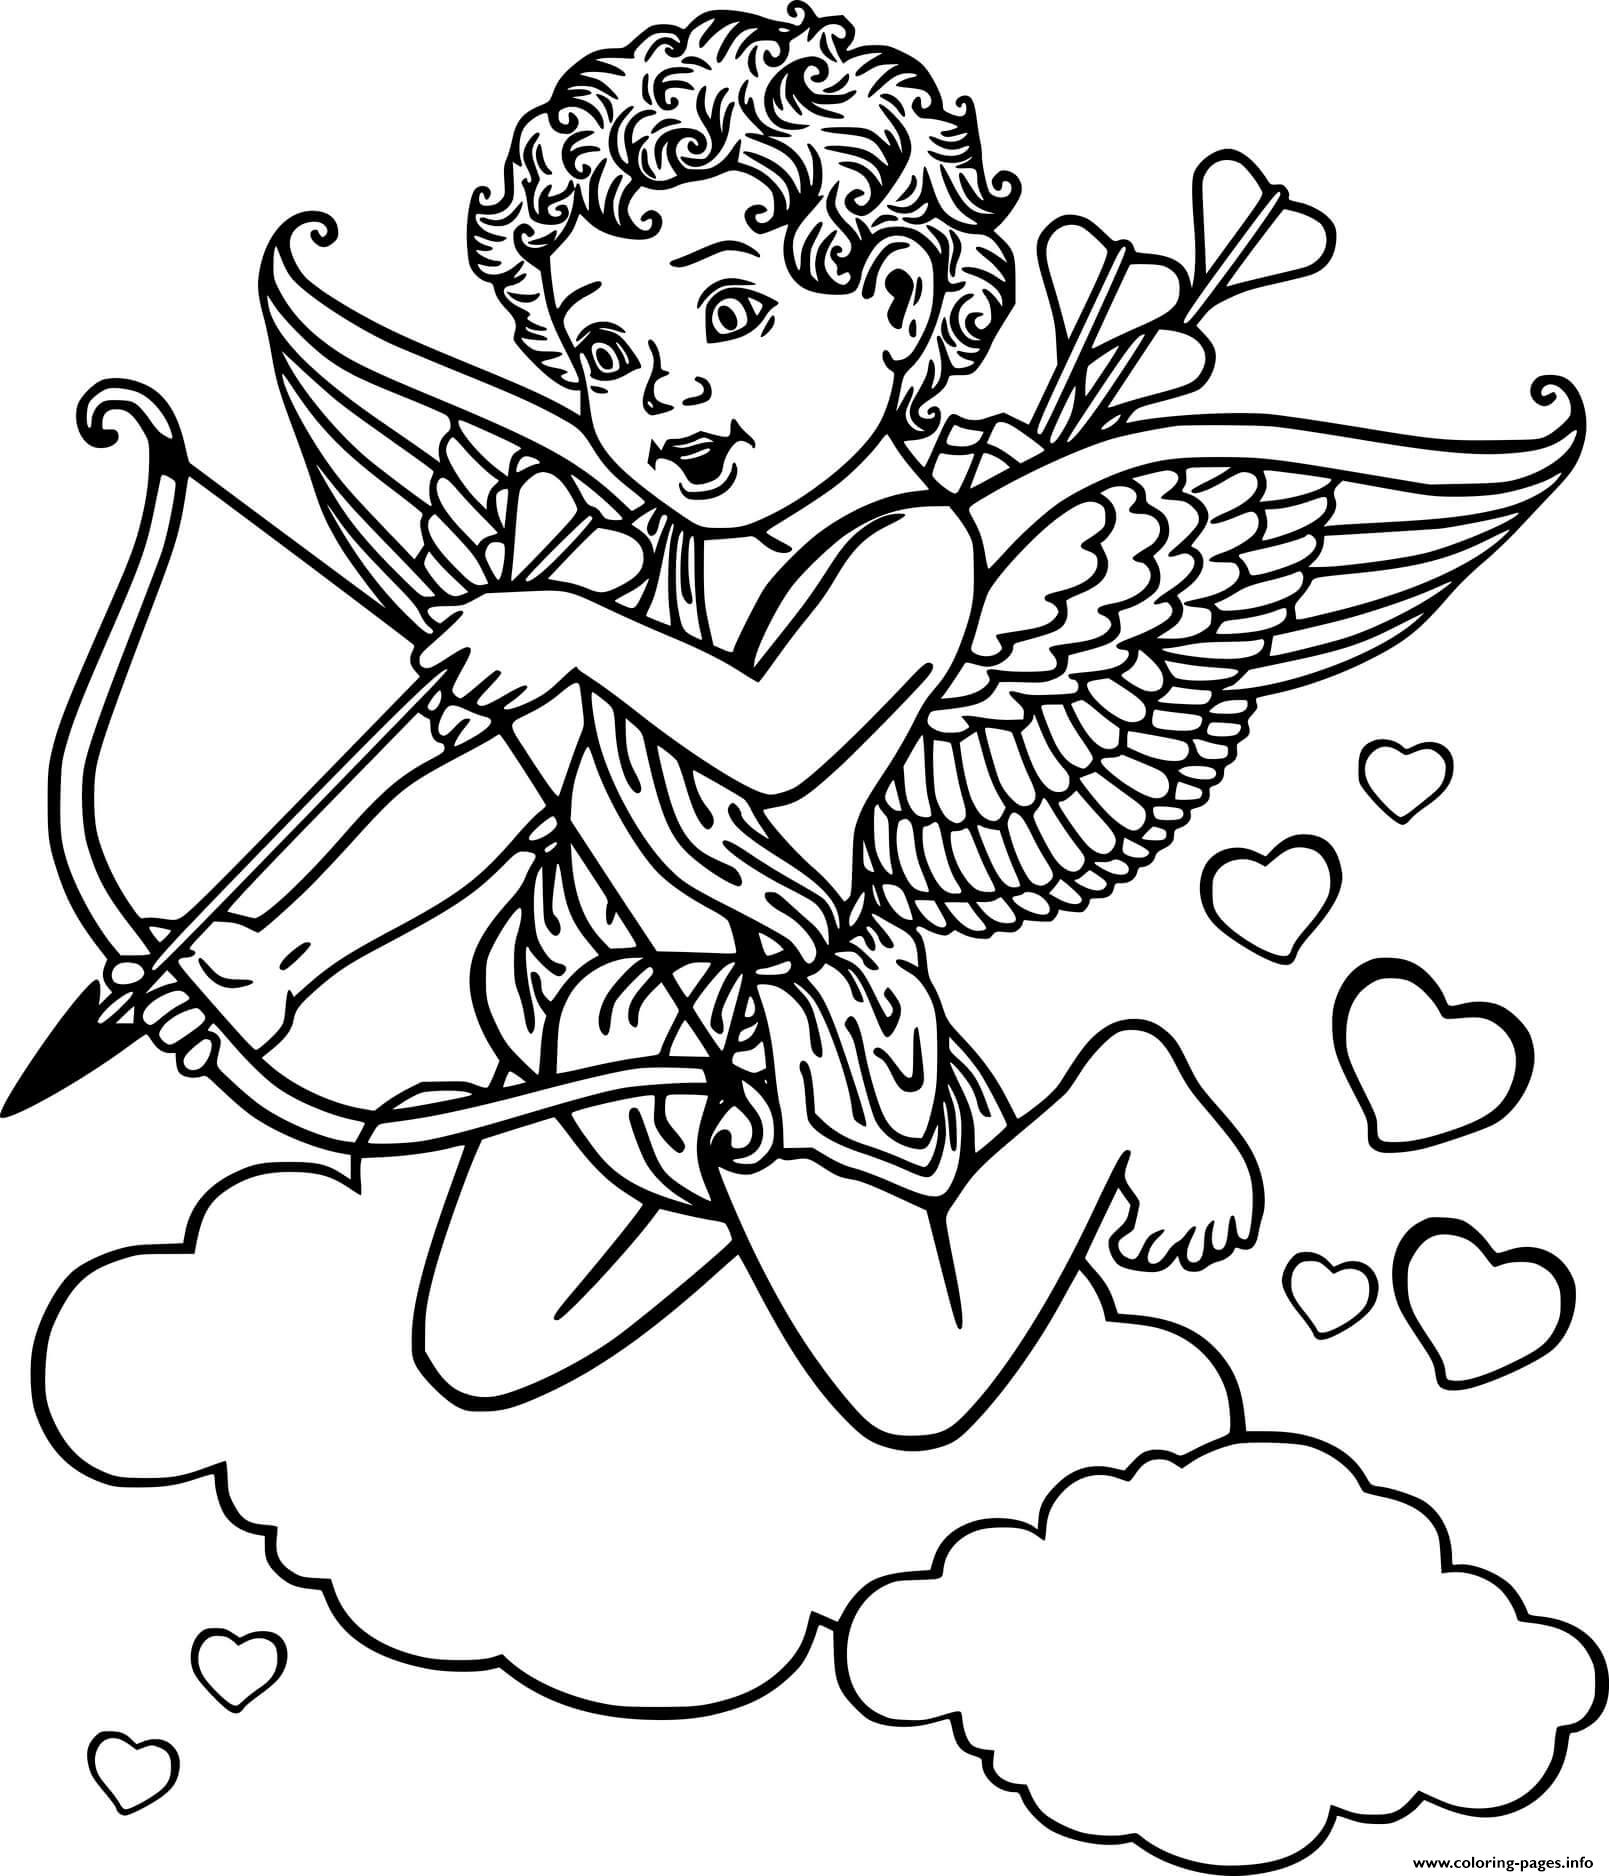 Cupid On Cloud coloring